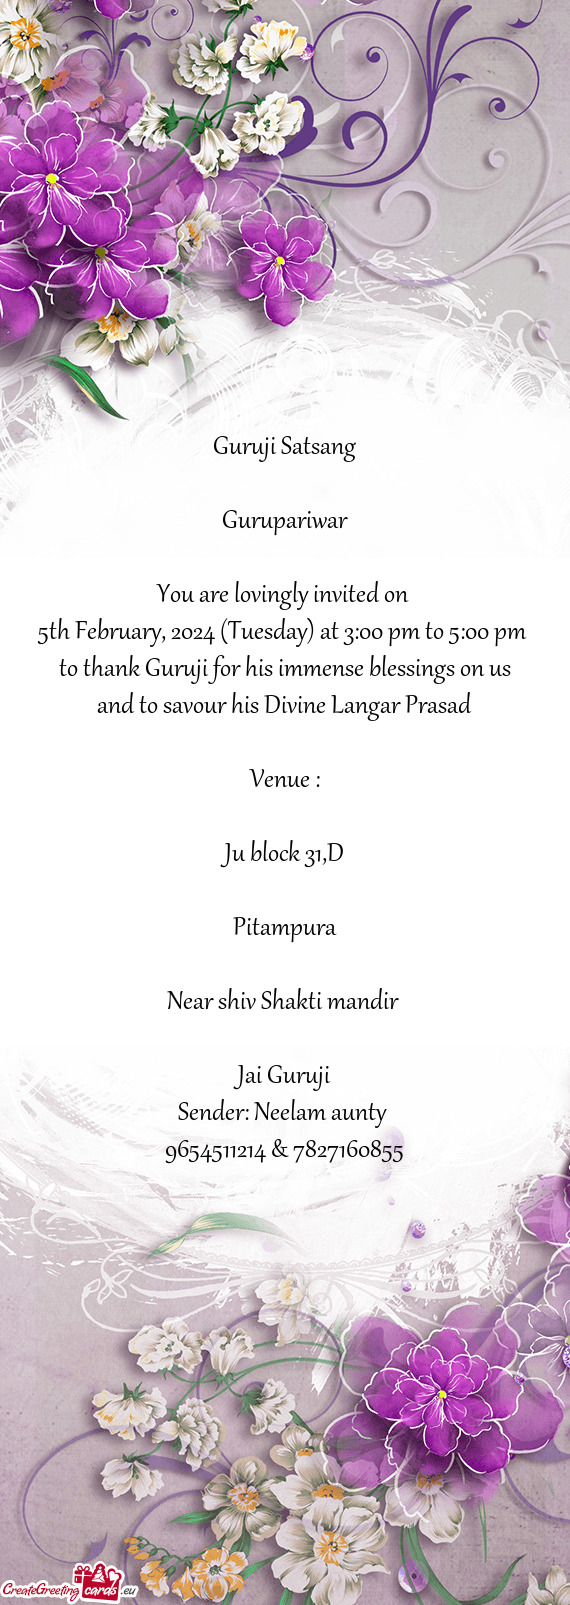 5th February, 2024 (Tuesday) at 3:00 pm to 5:00 pm